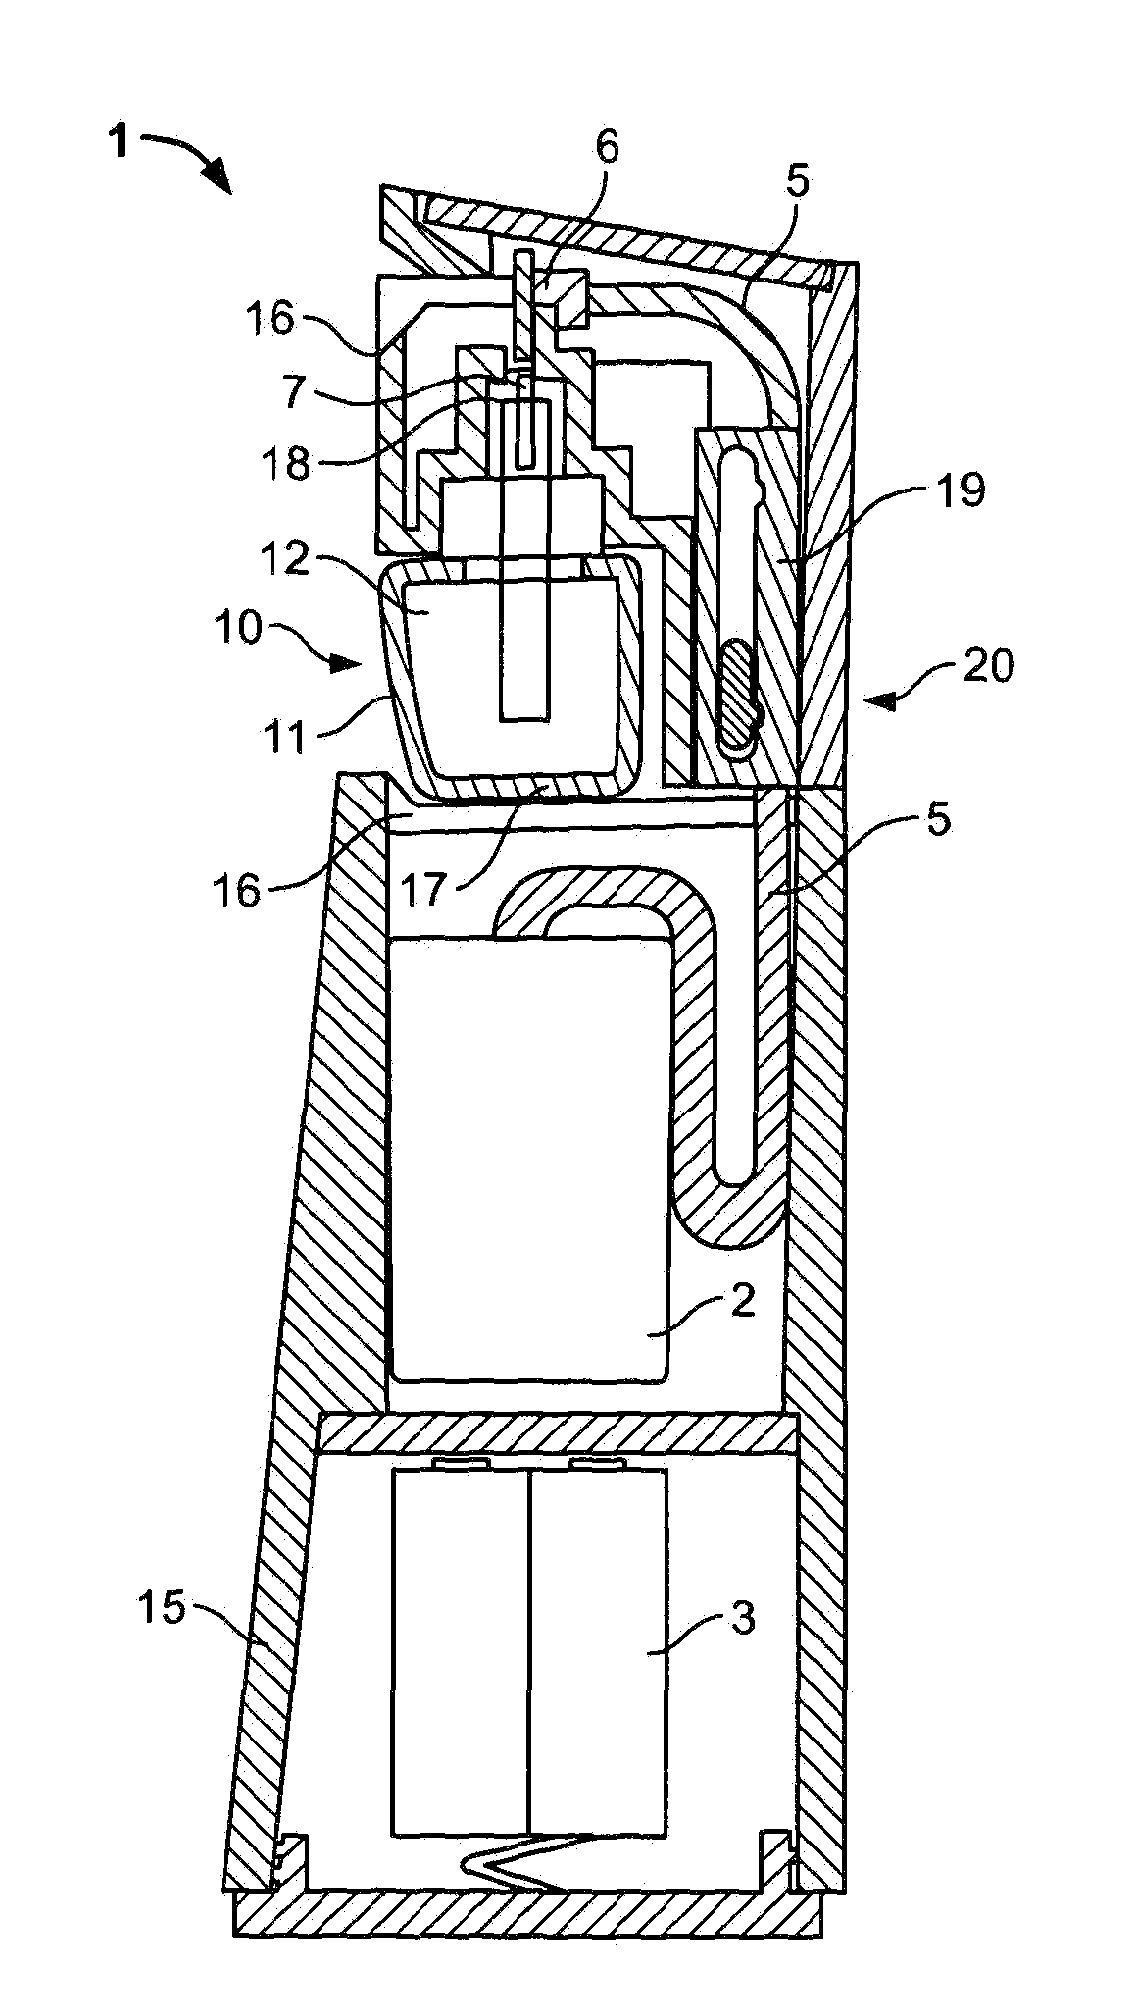 Devices and methods for improved delivery of volatile liquids